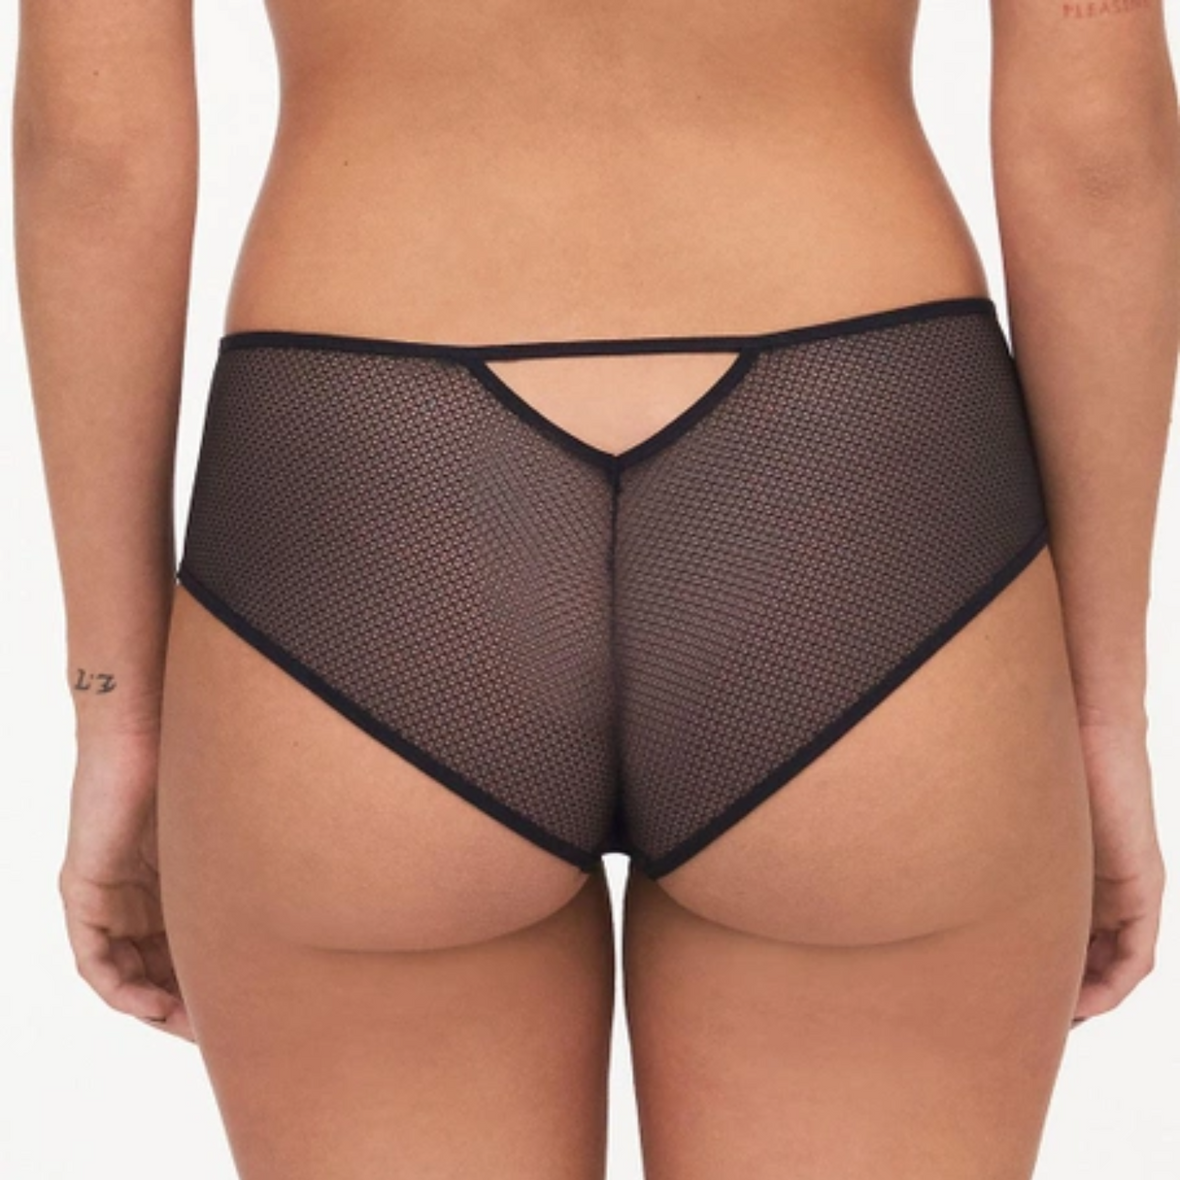 A close up shot of a model wearing the Passionata Olivia Shorty, showing the back detail.